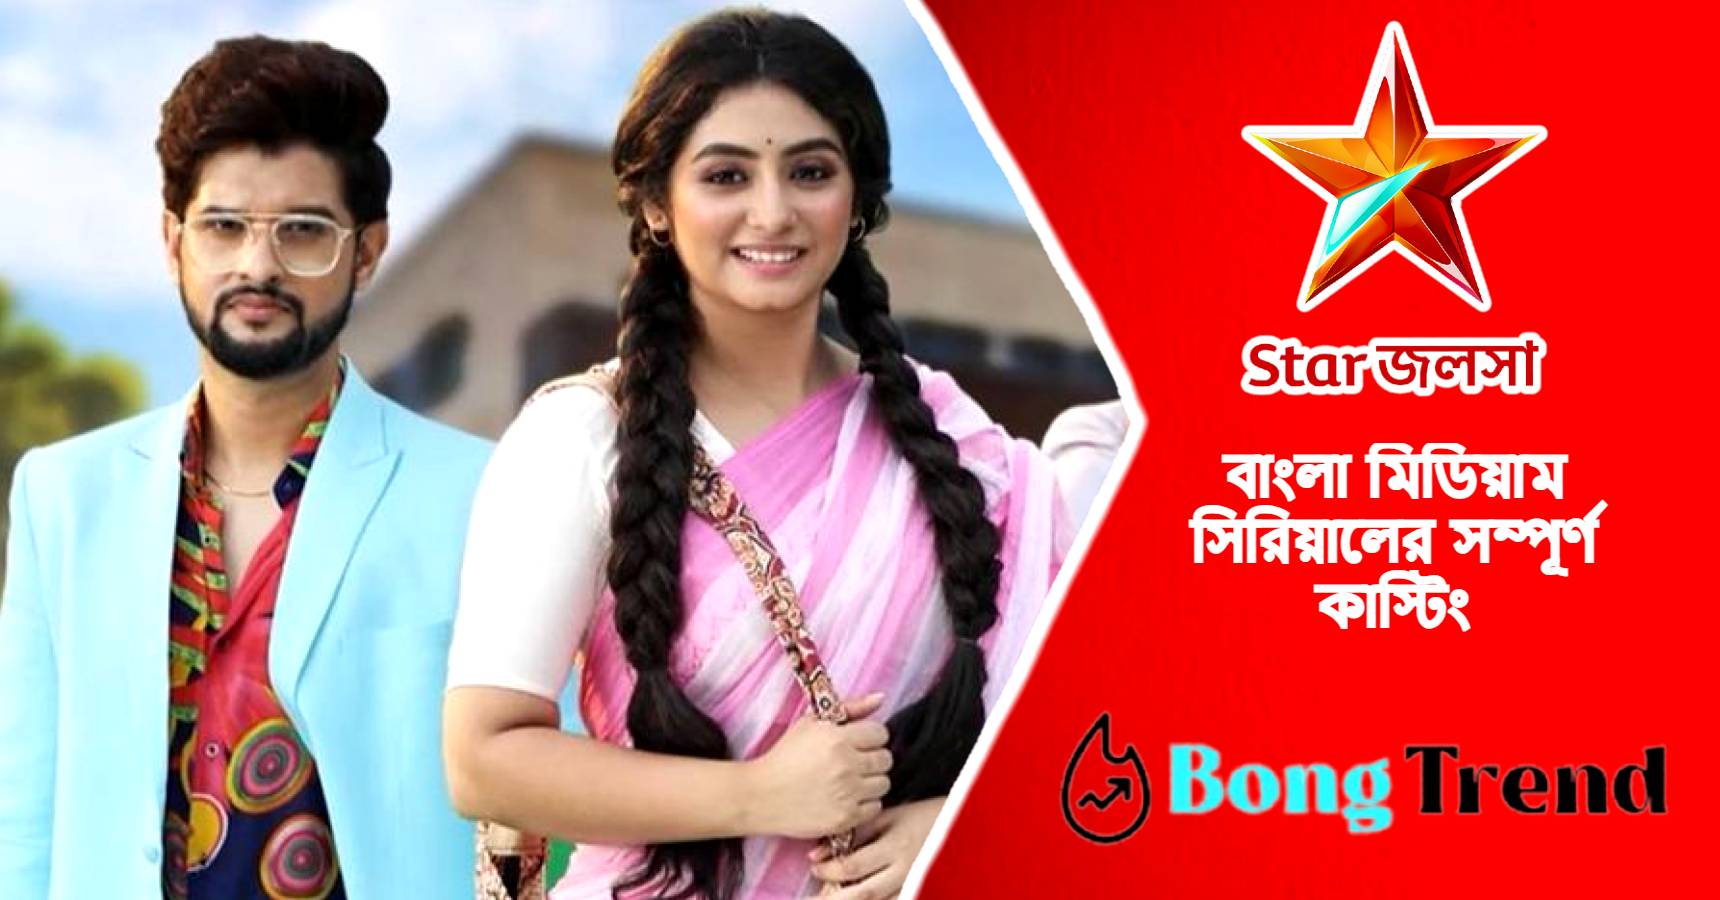 Bangla Medium serial casting wiki with production house character wise real names of actor actresses